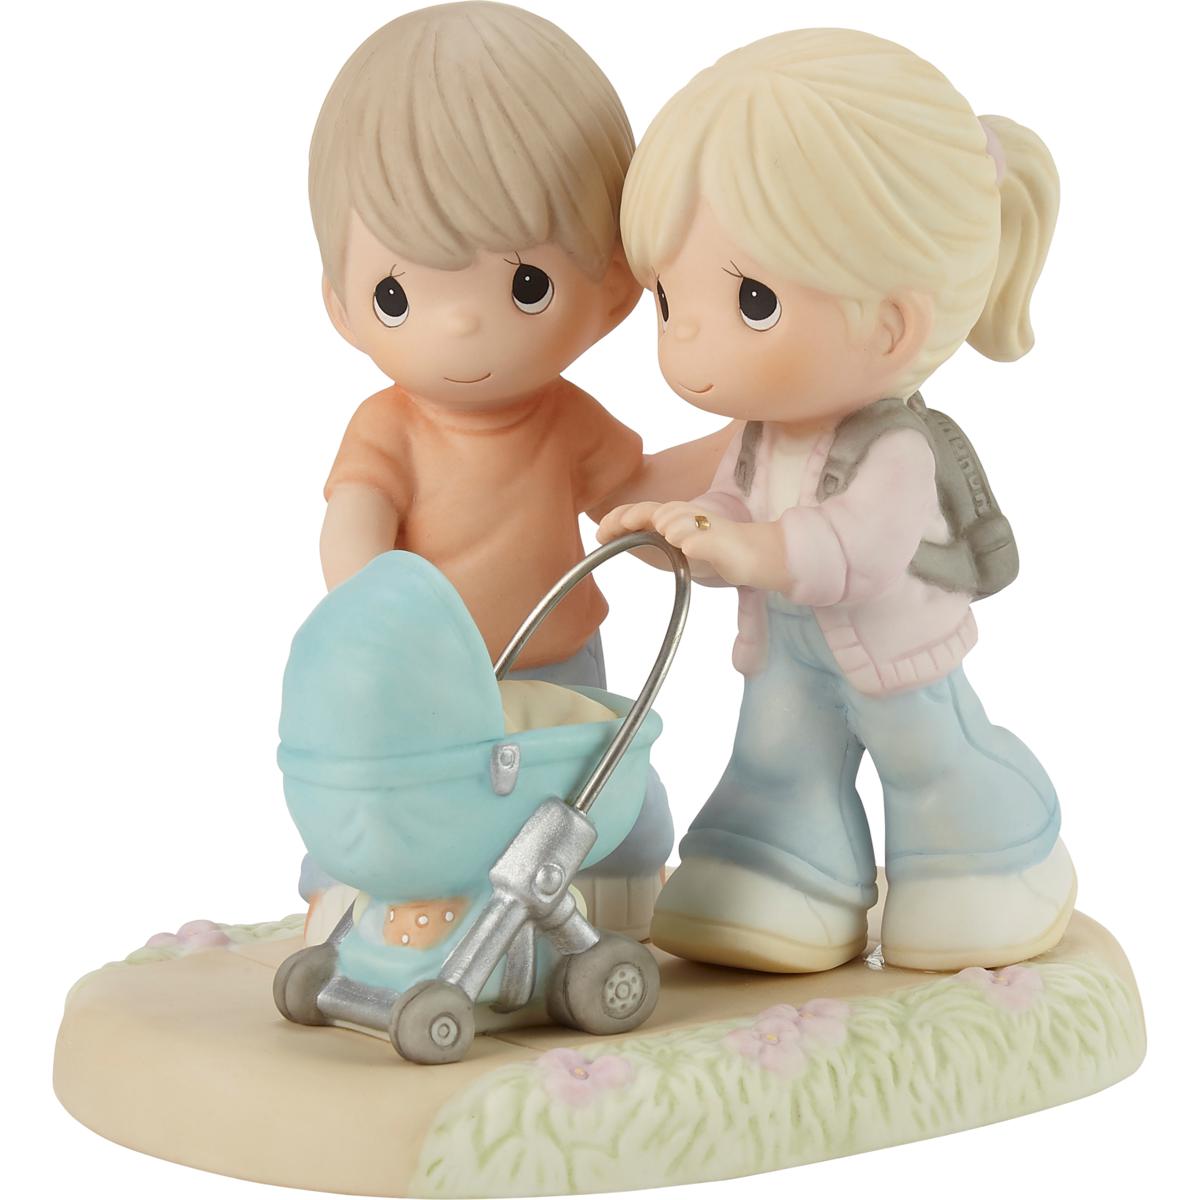 Precious Moments (You Strolled Into Our Hearts) Porcelain Figurine